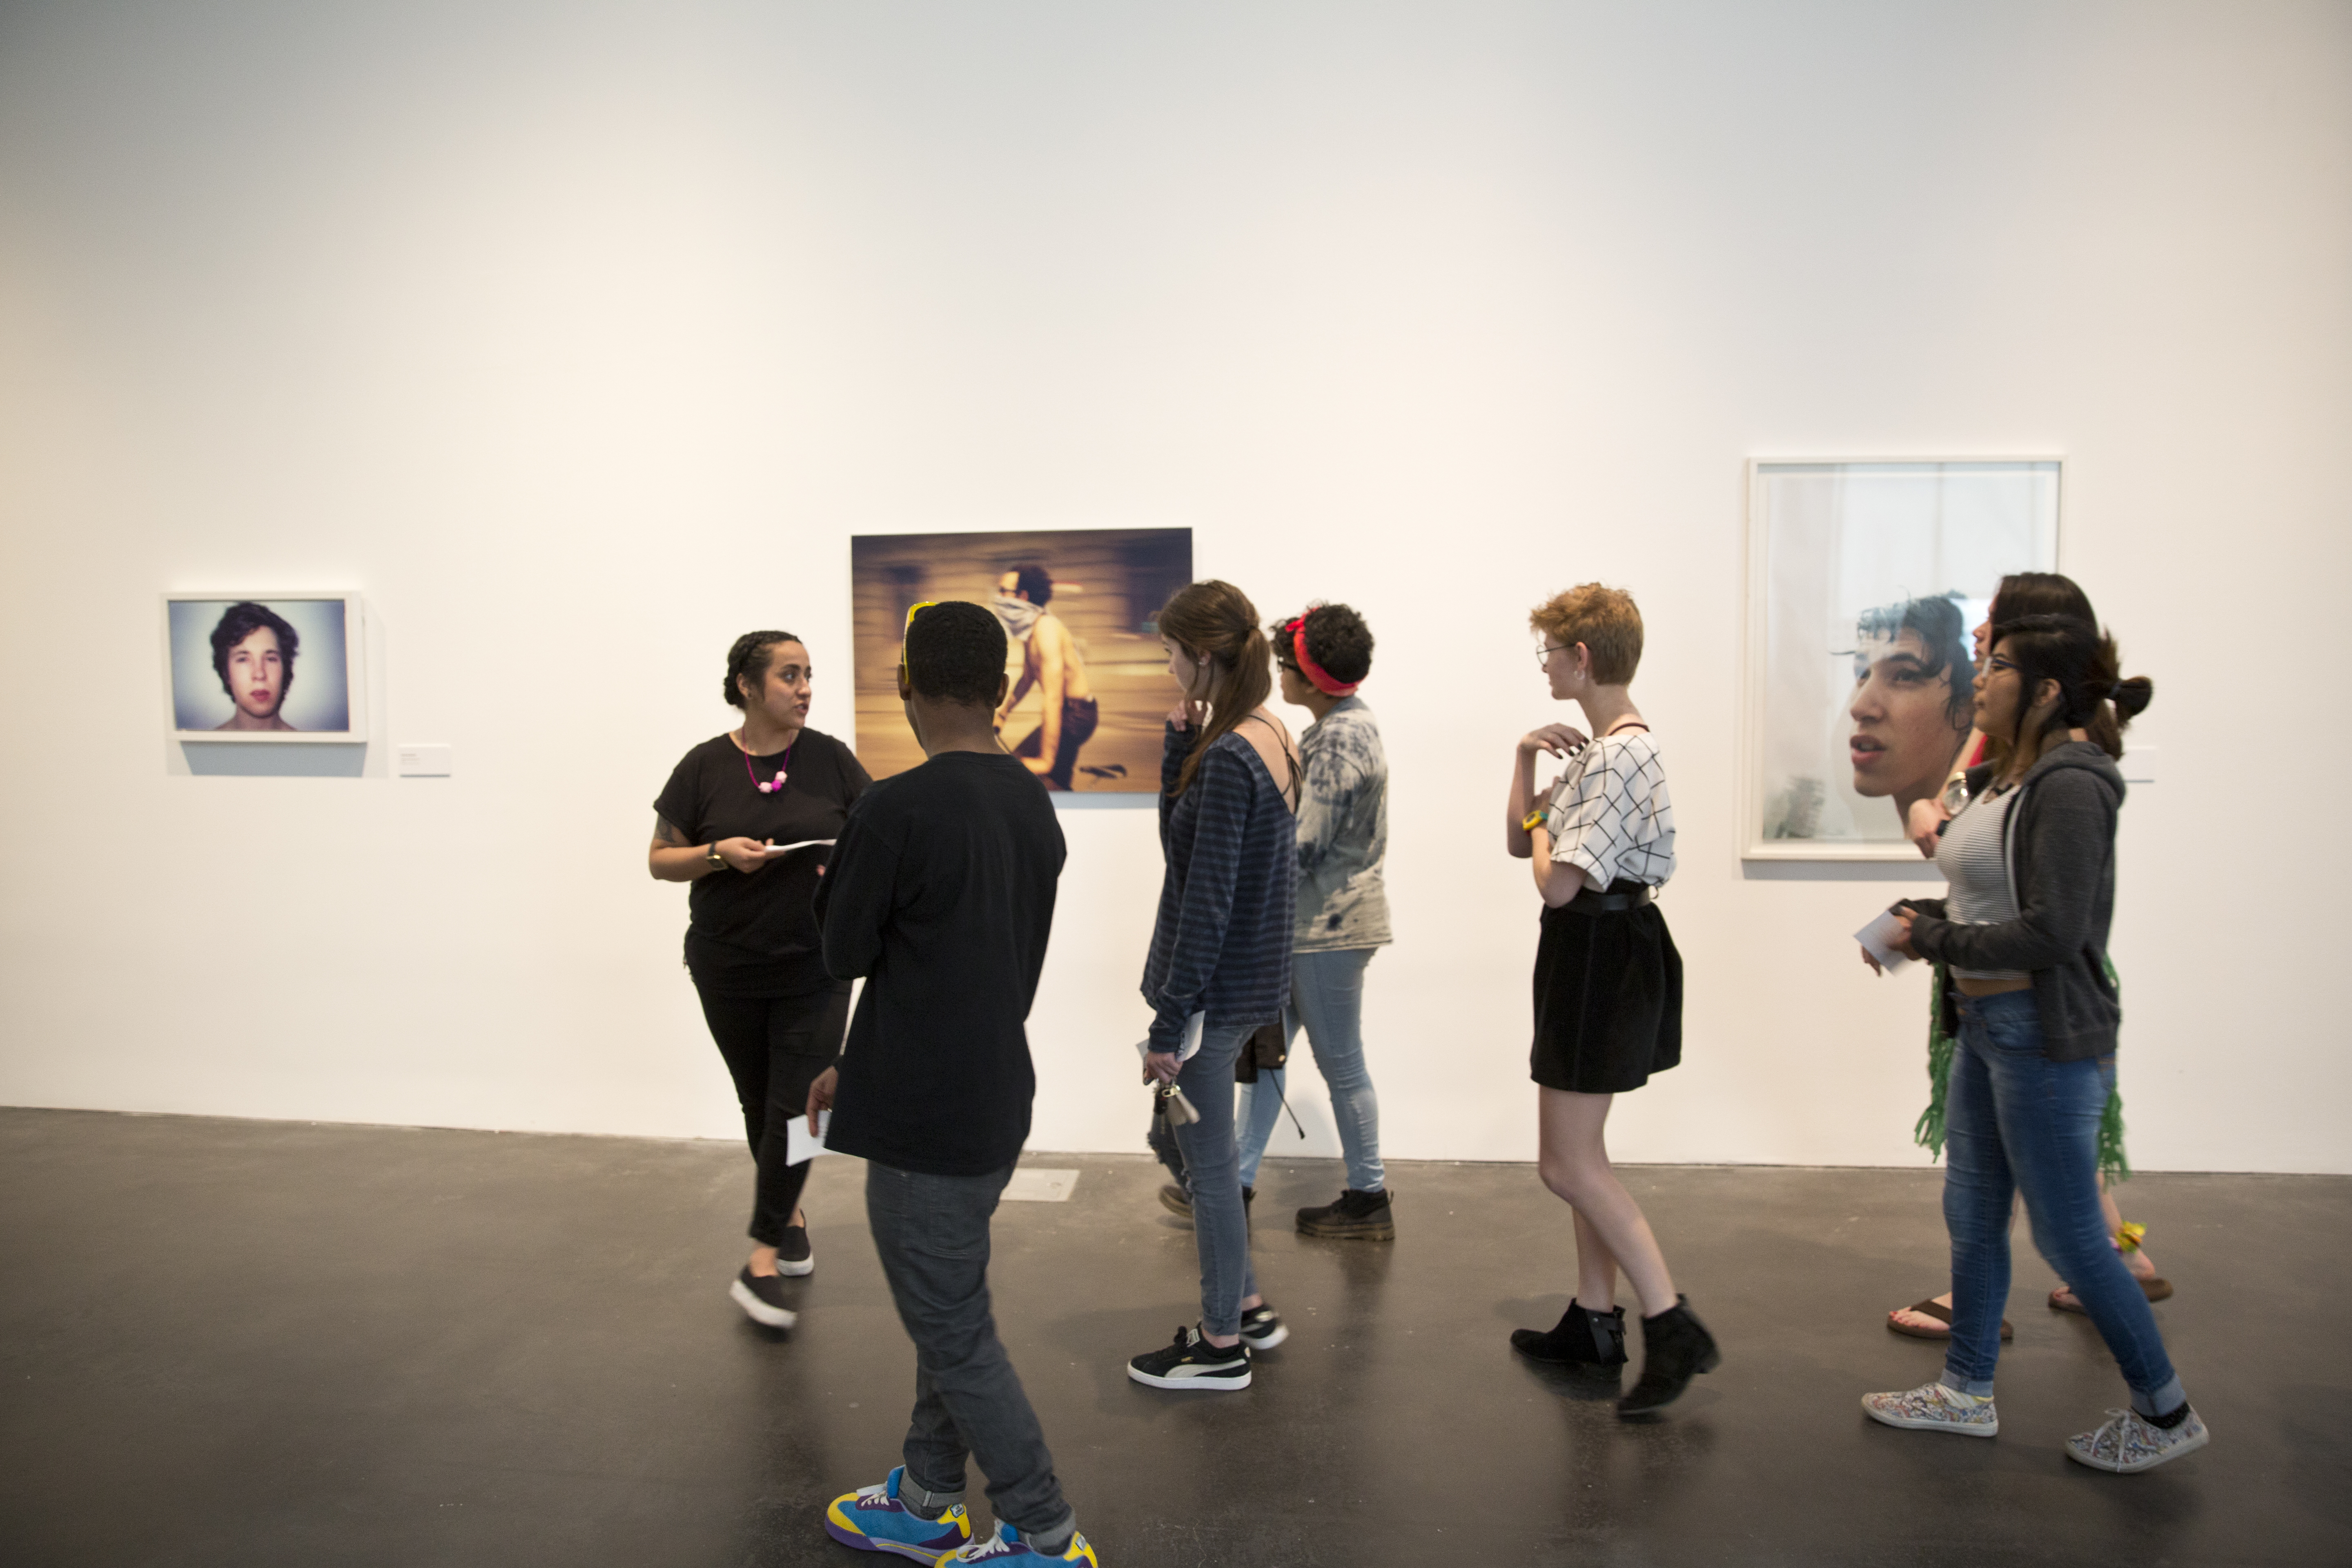 A group of teens are led by an adult in an art gallery. The walls hold photophraphs of young men. 